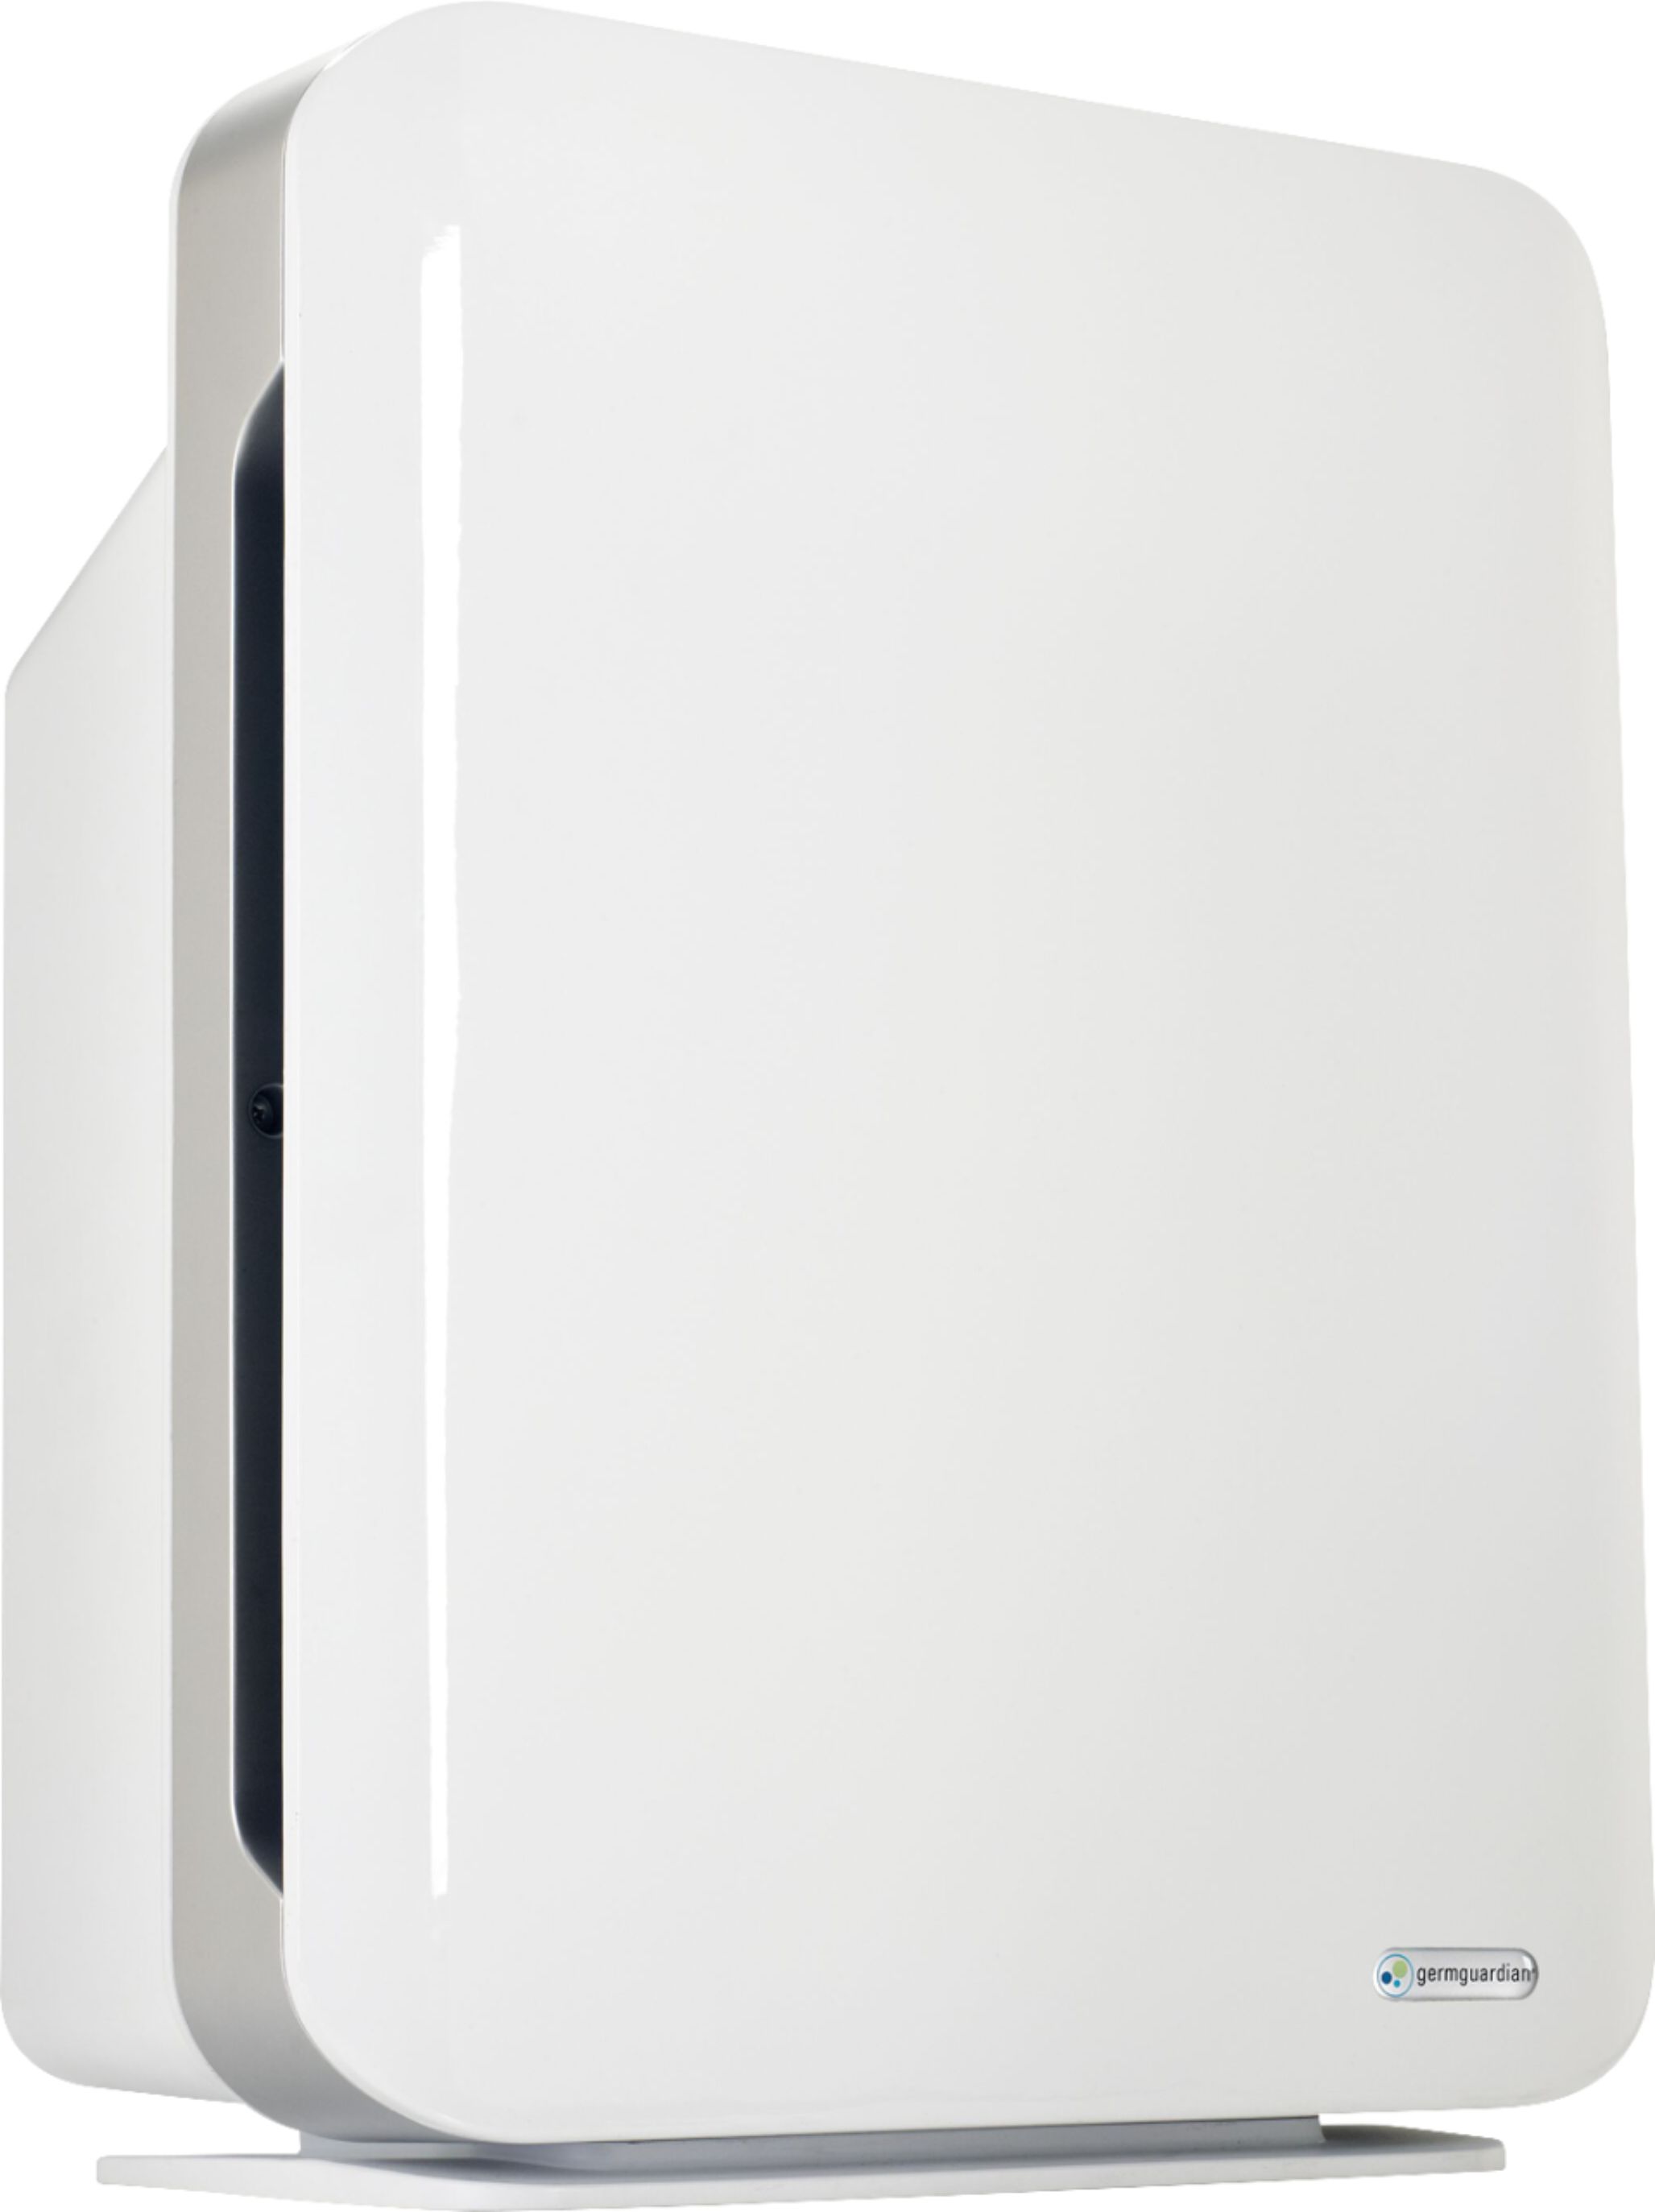 Angle View: GermGuardian - 338 Sq. Ft Console Air Purifier - White